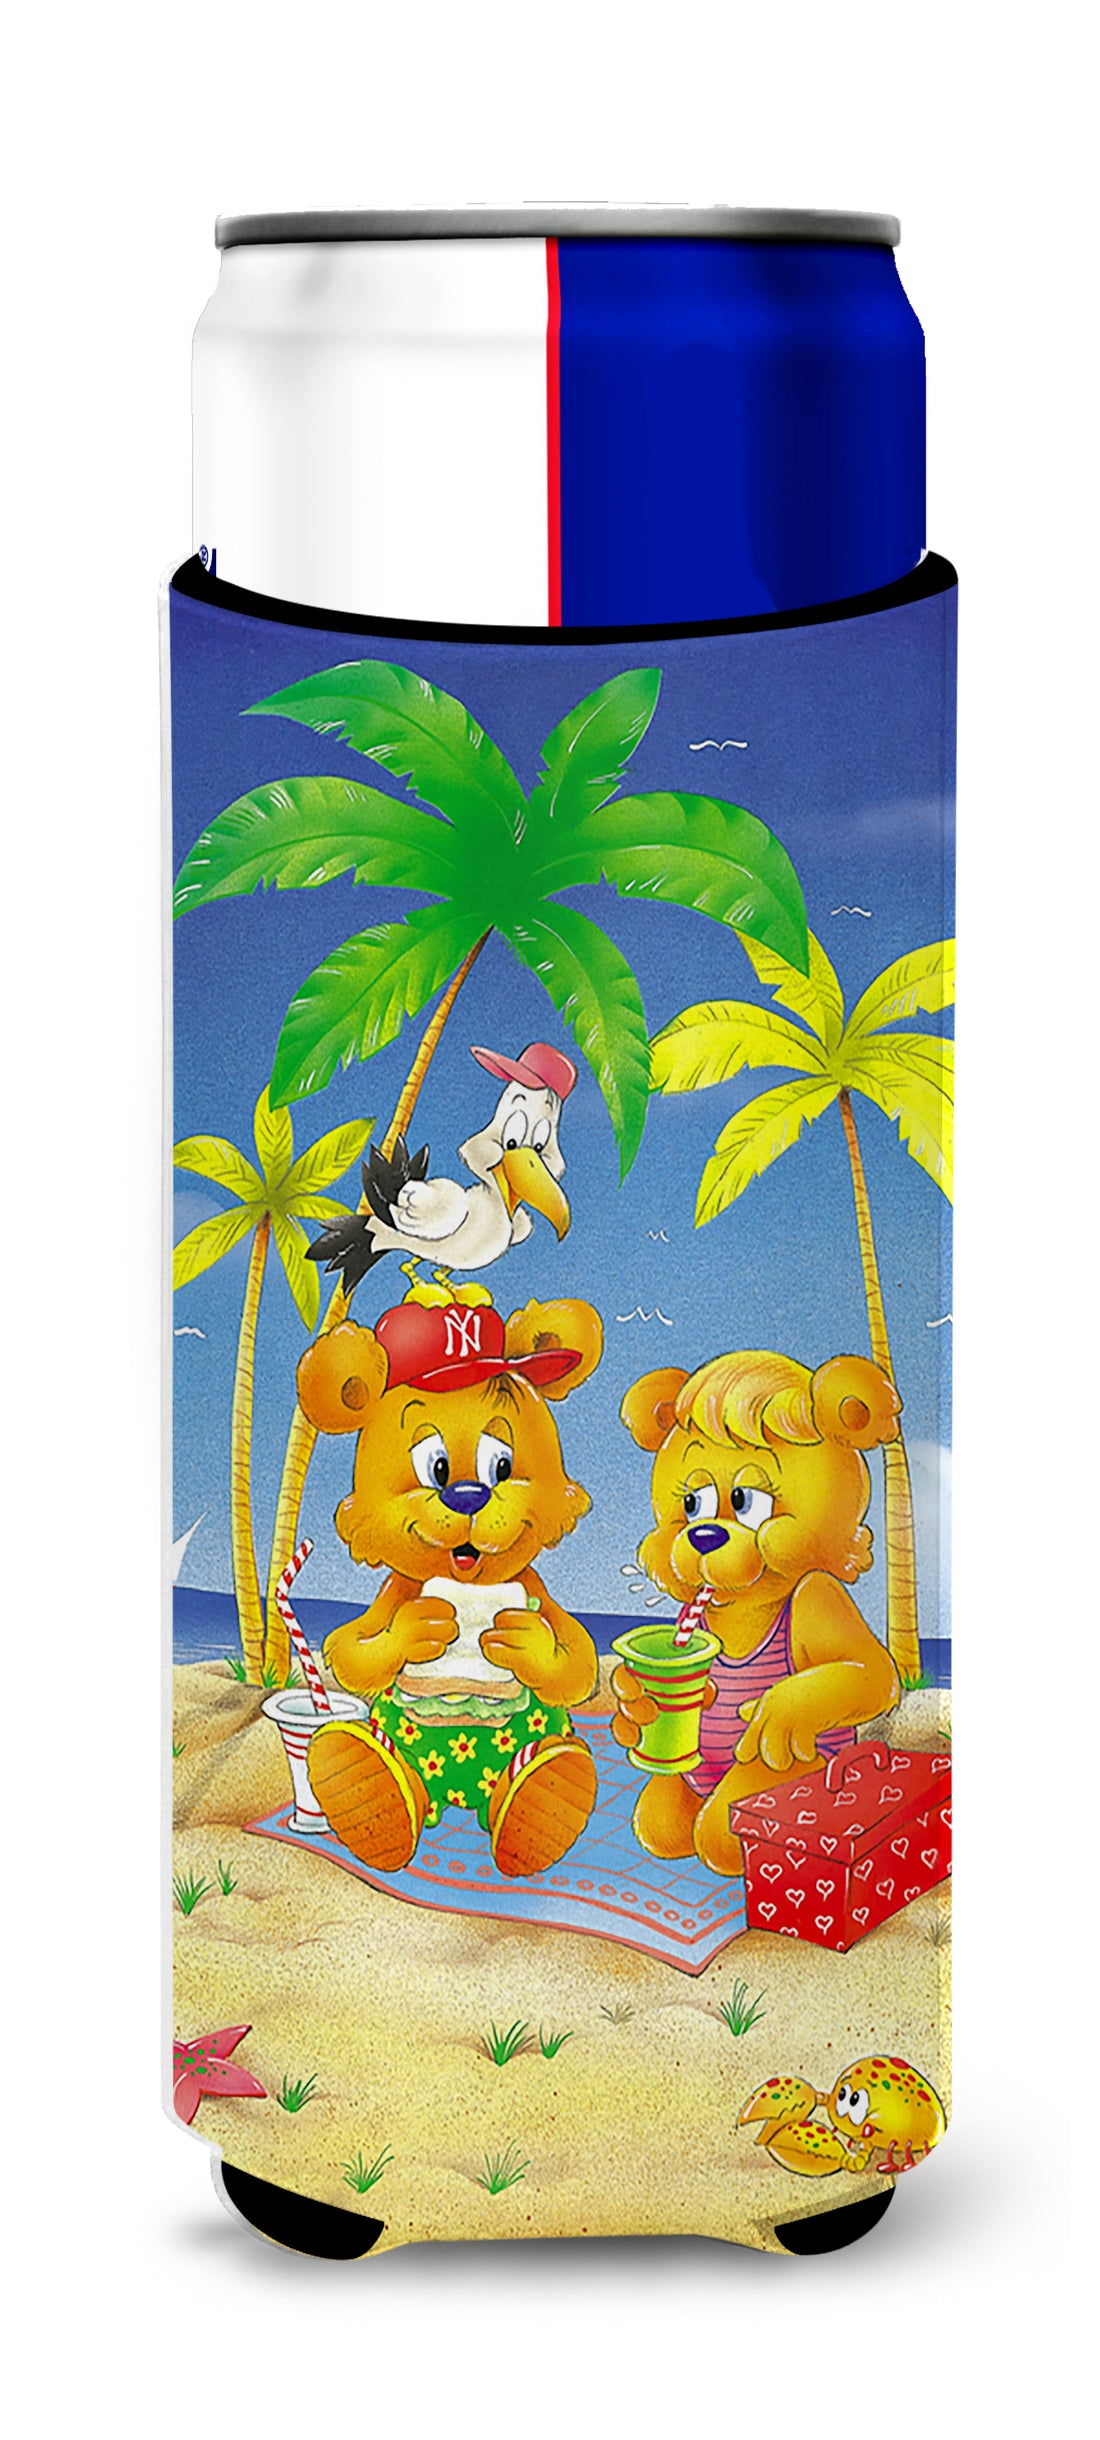 Teddy Bears Picnic on the Beach  Ultra Beverage Insulators for slim cans APH0239MUK